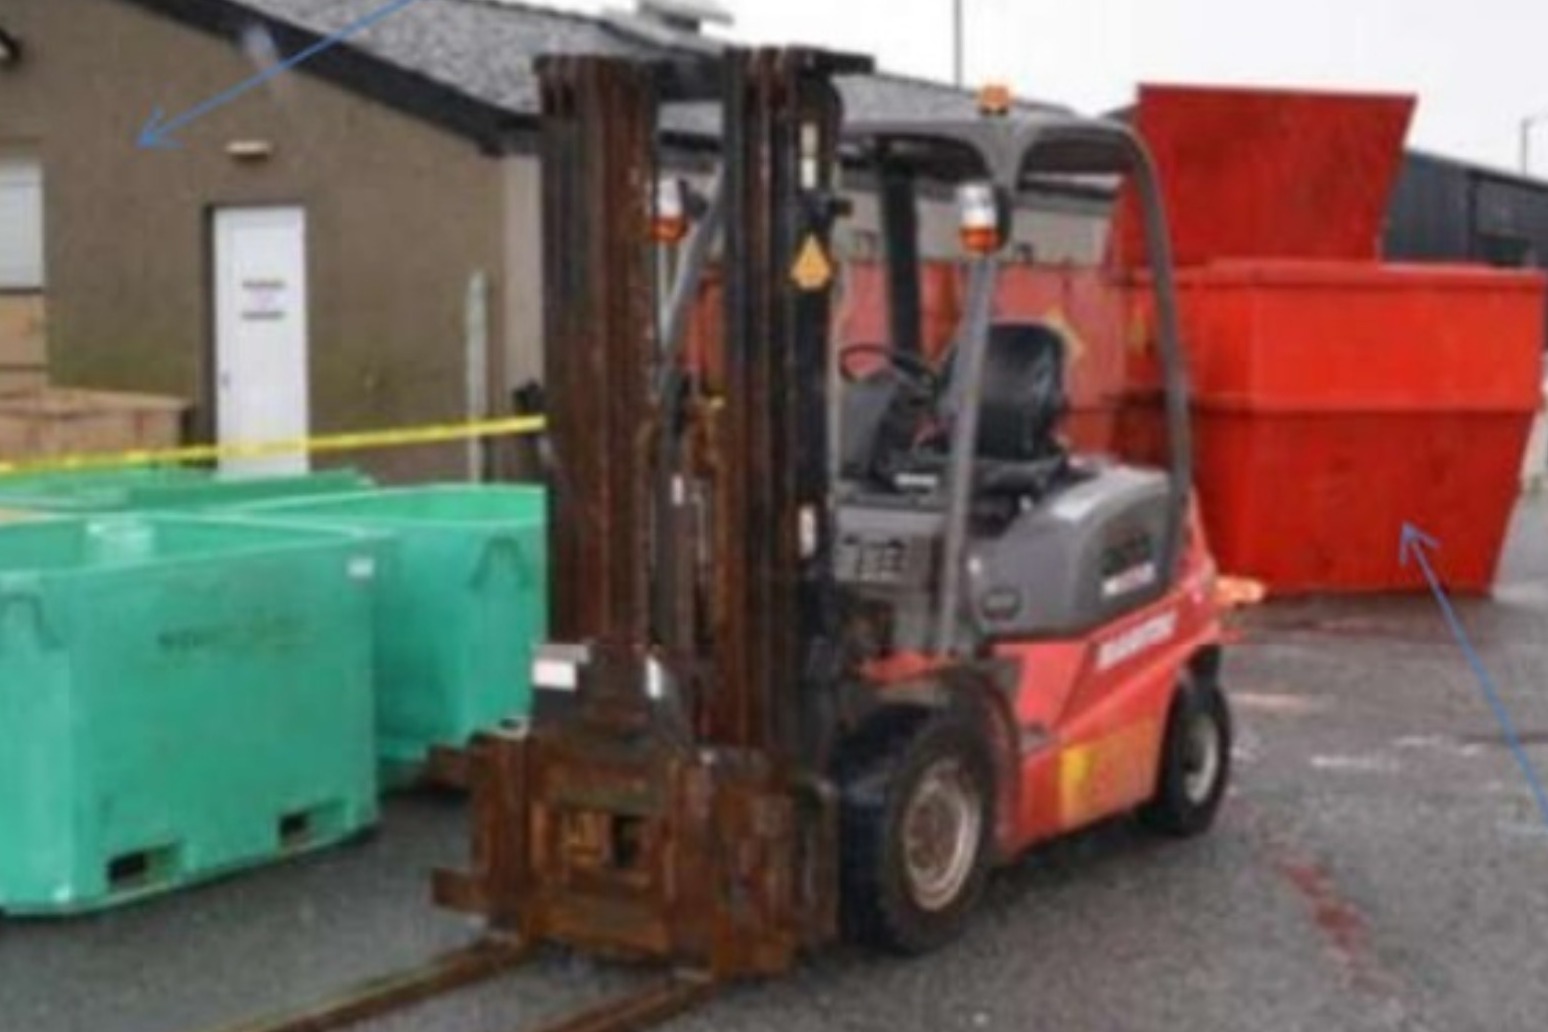 Teenager was ‘crushed to death by forklift truck in first month of new job’ 